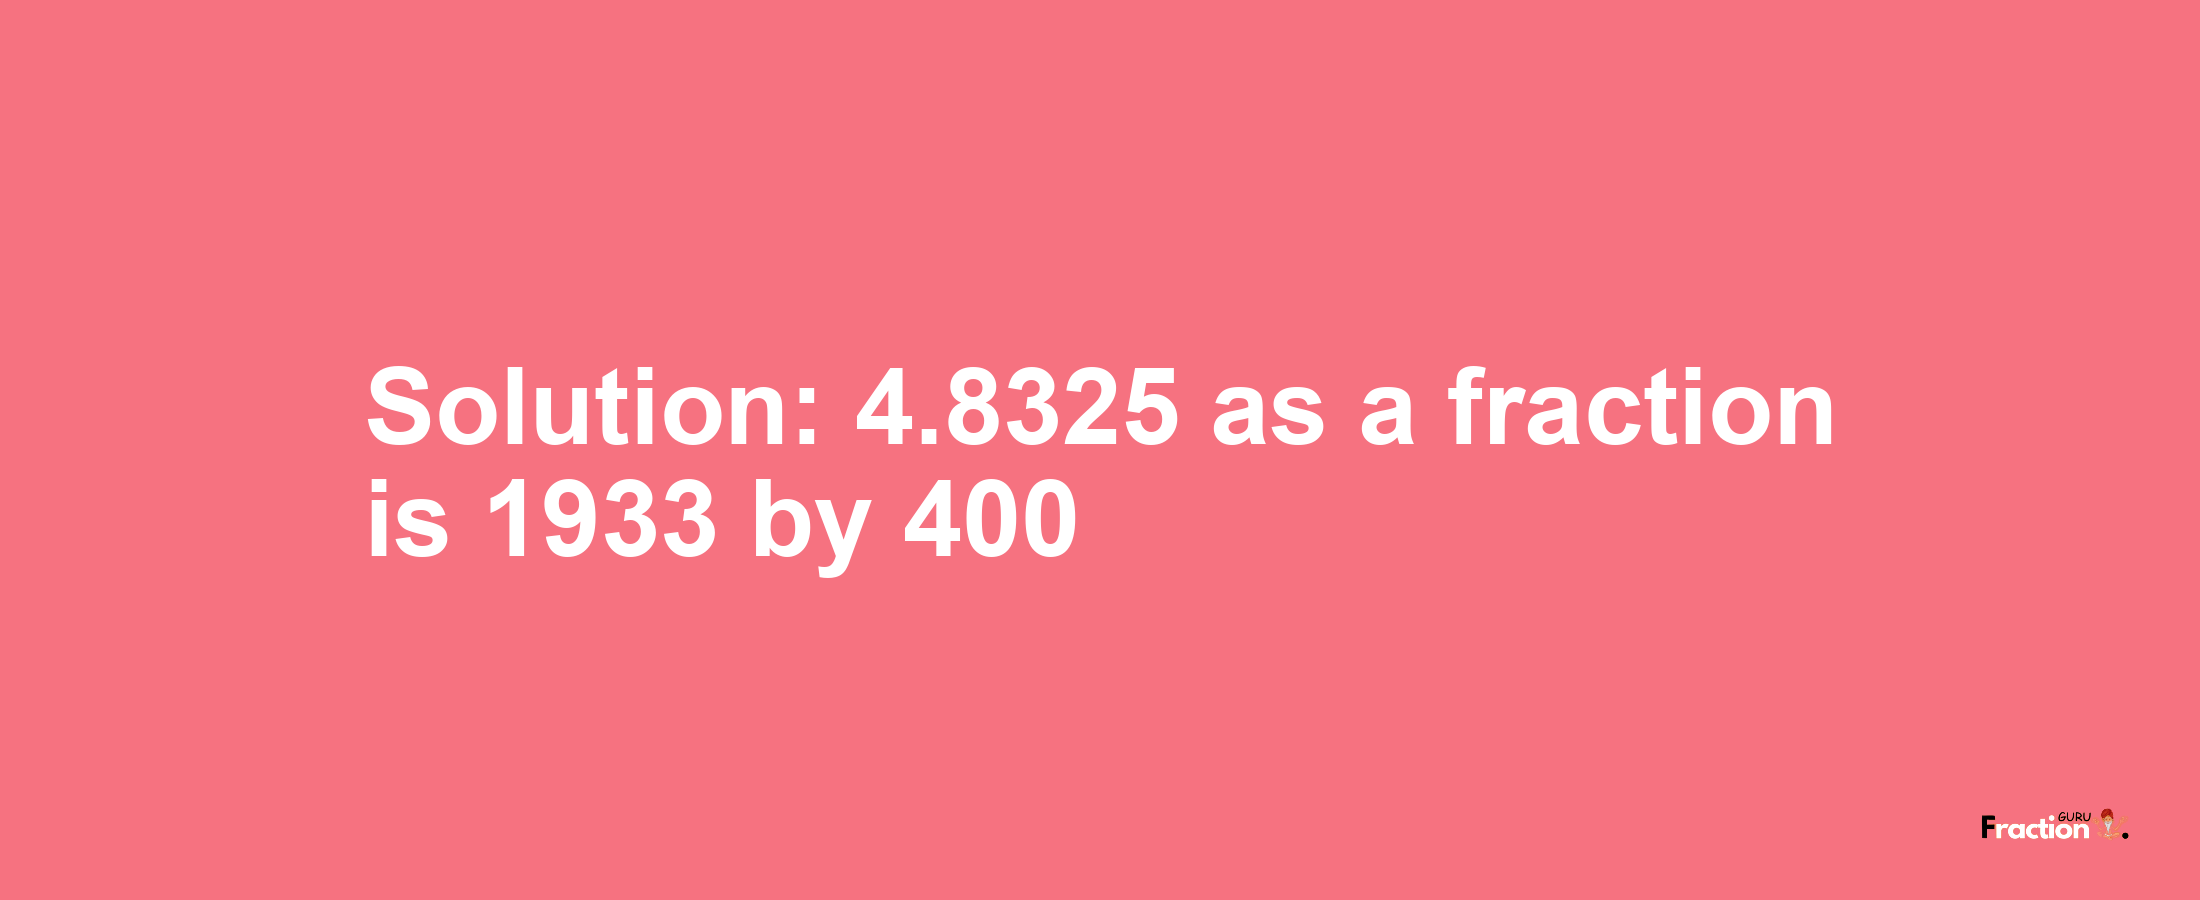 Solution:4.8325 as a fraction is 1933/400